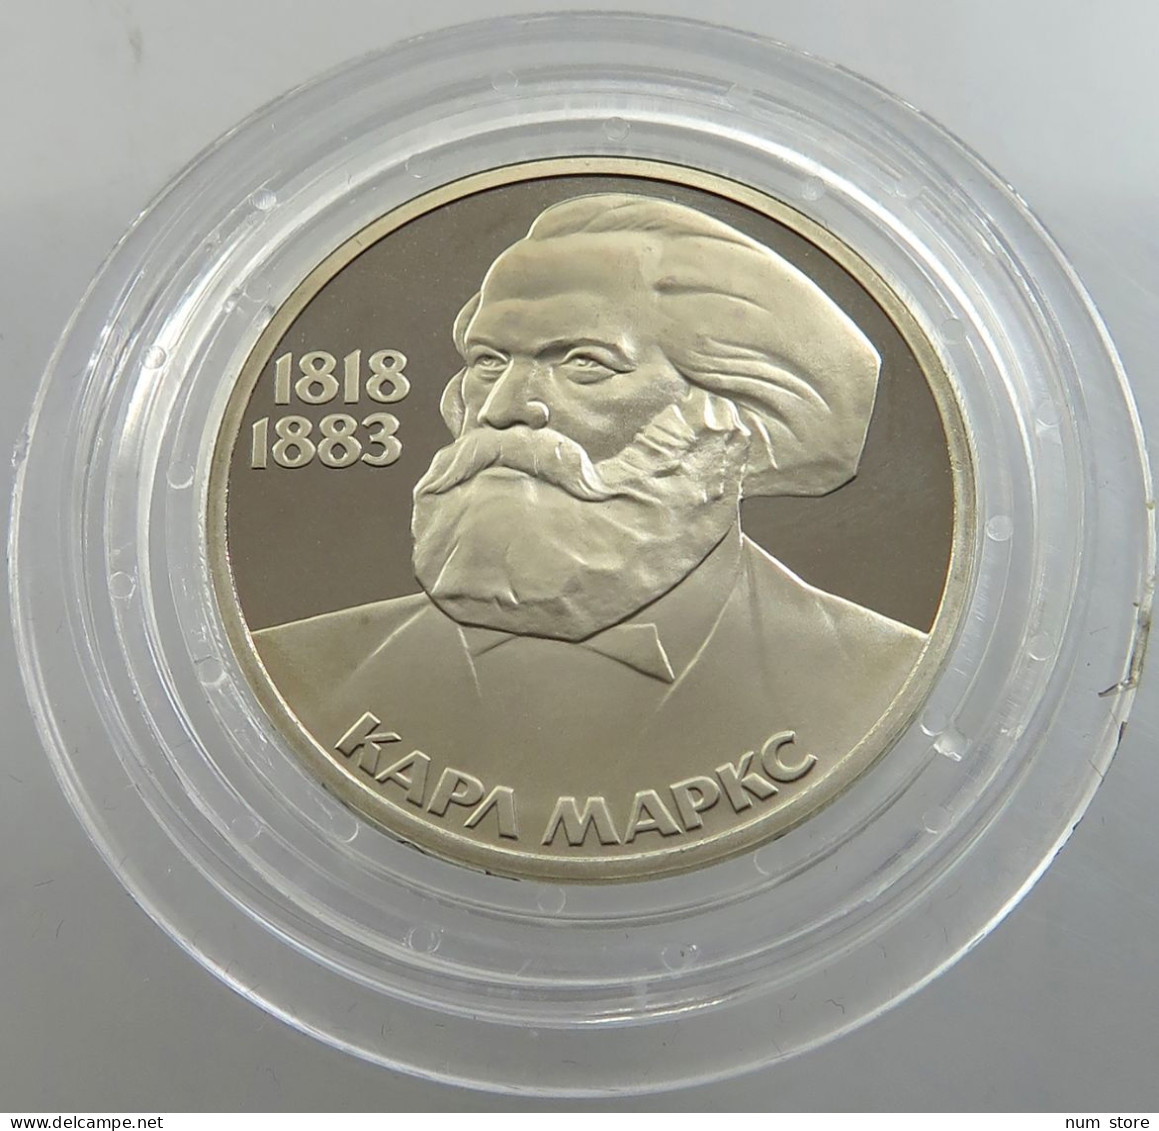 RUSSIA USSR 1 ROUBLE 1983 1988 MARX PROOF #sm14 0333 - Russia